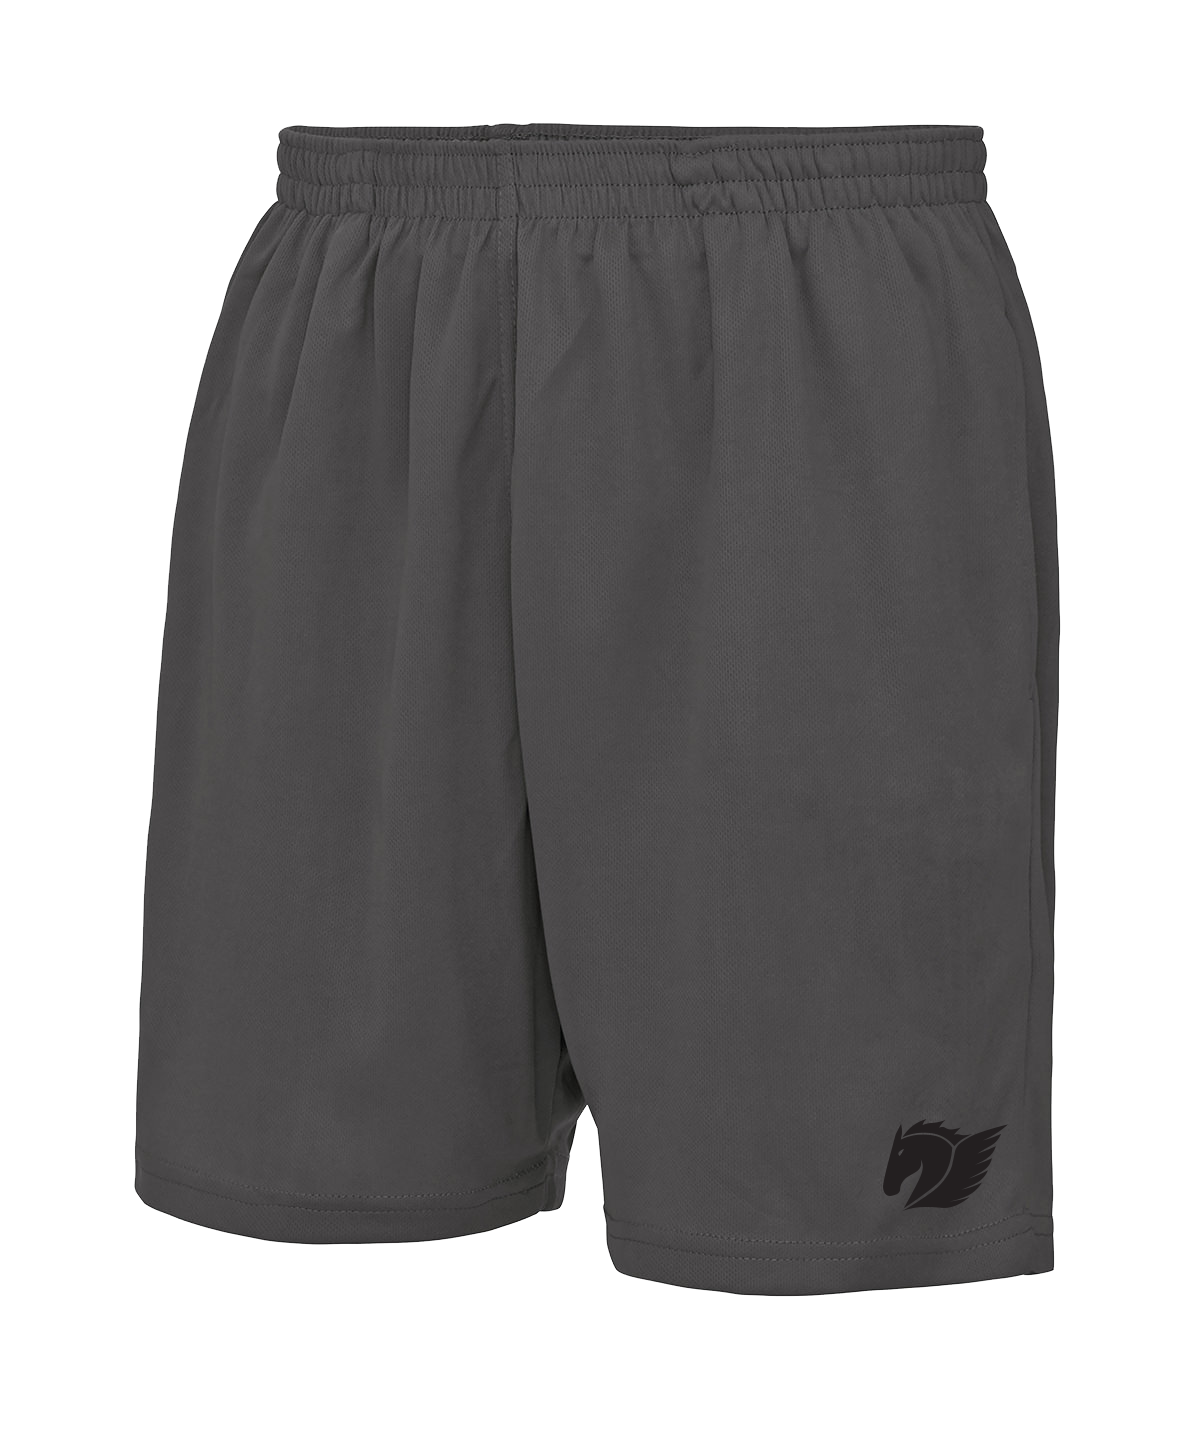 Essential Shorts - Charcoal